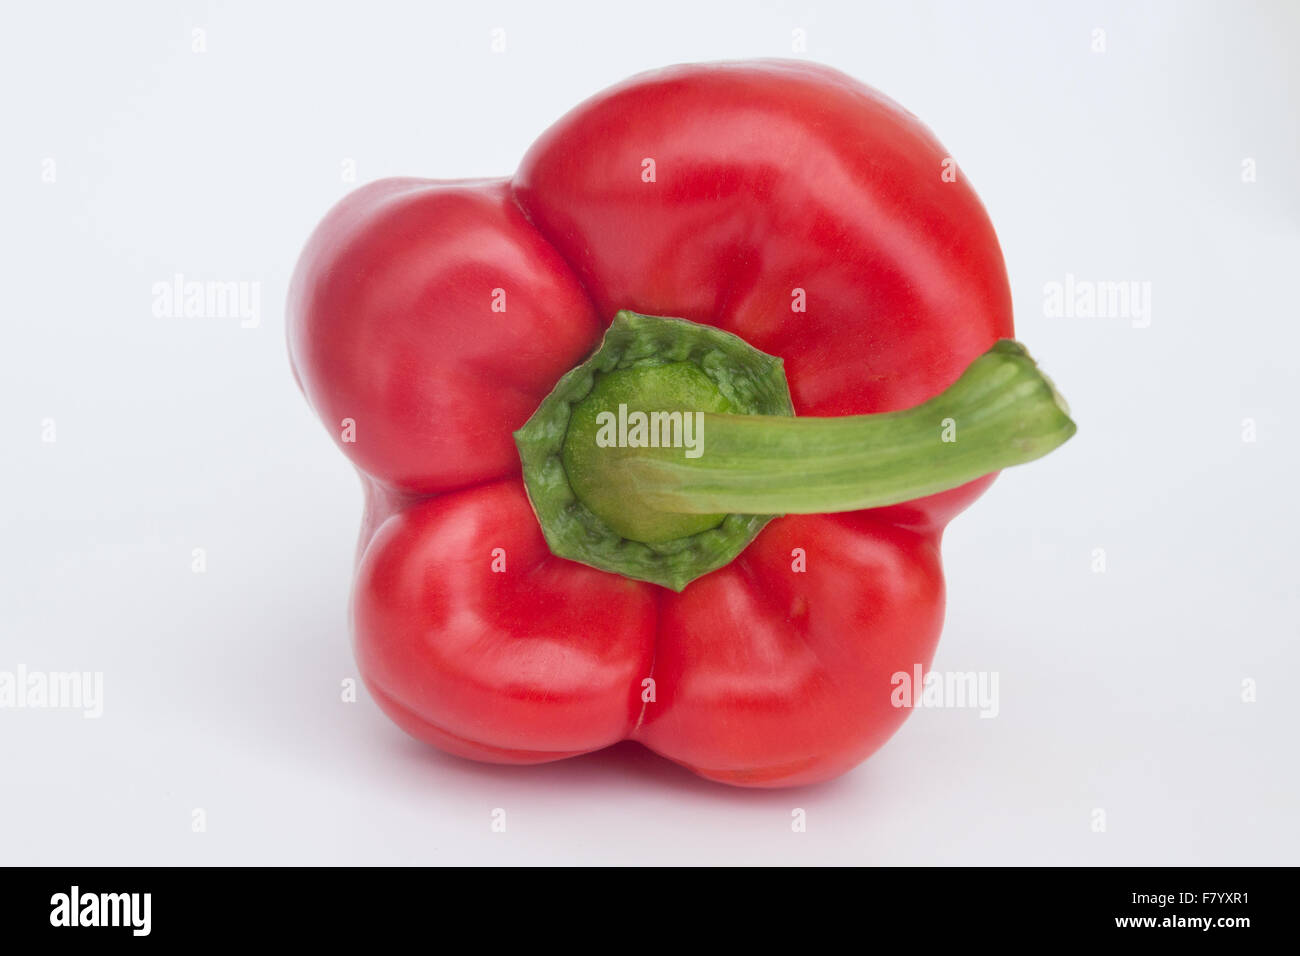 Bell Pepper isolated, red paprika / sweet pepper Stock Photo